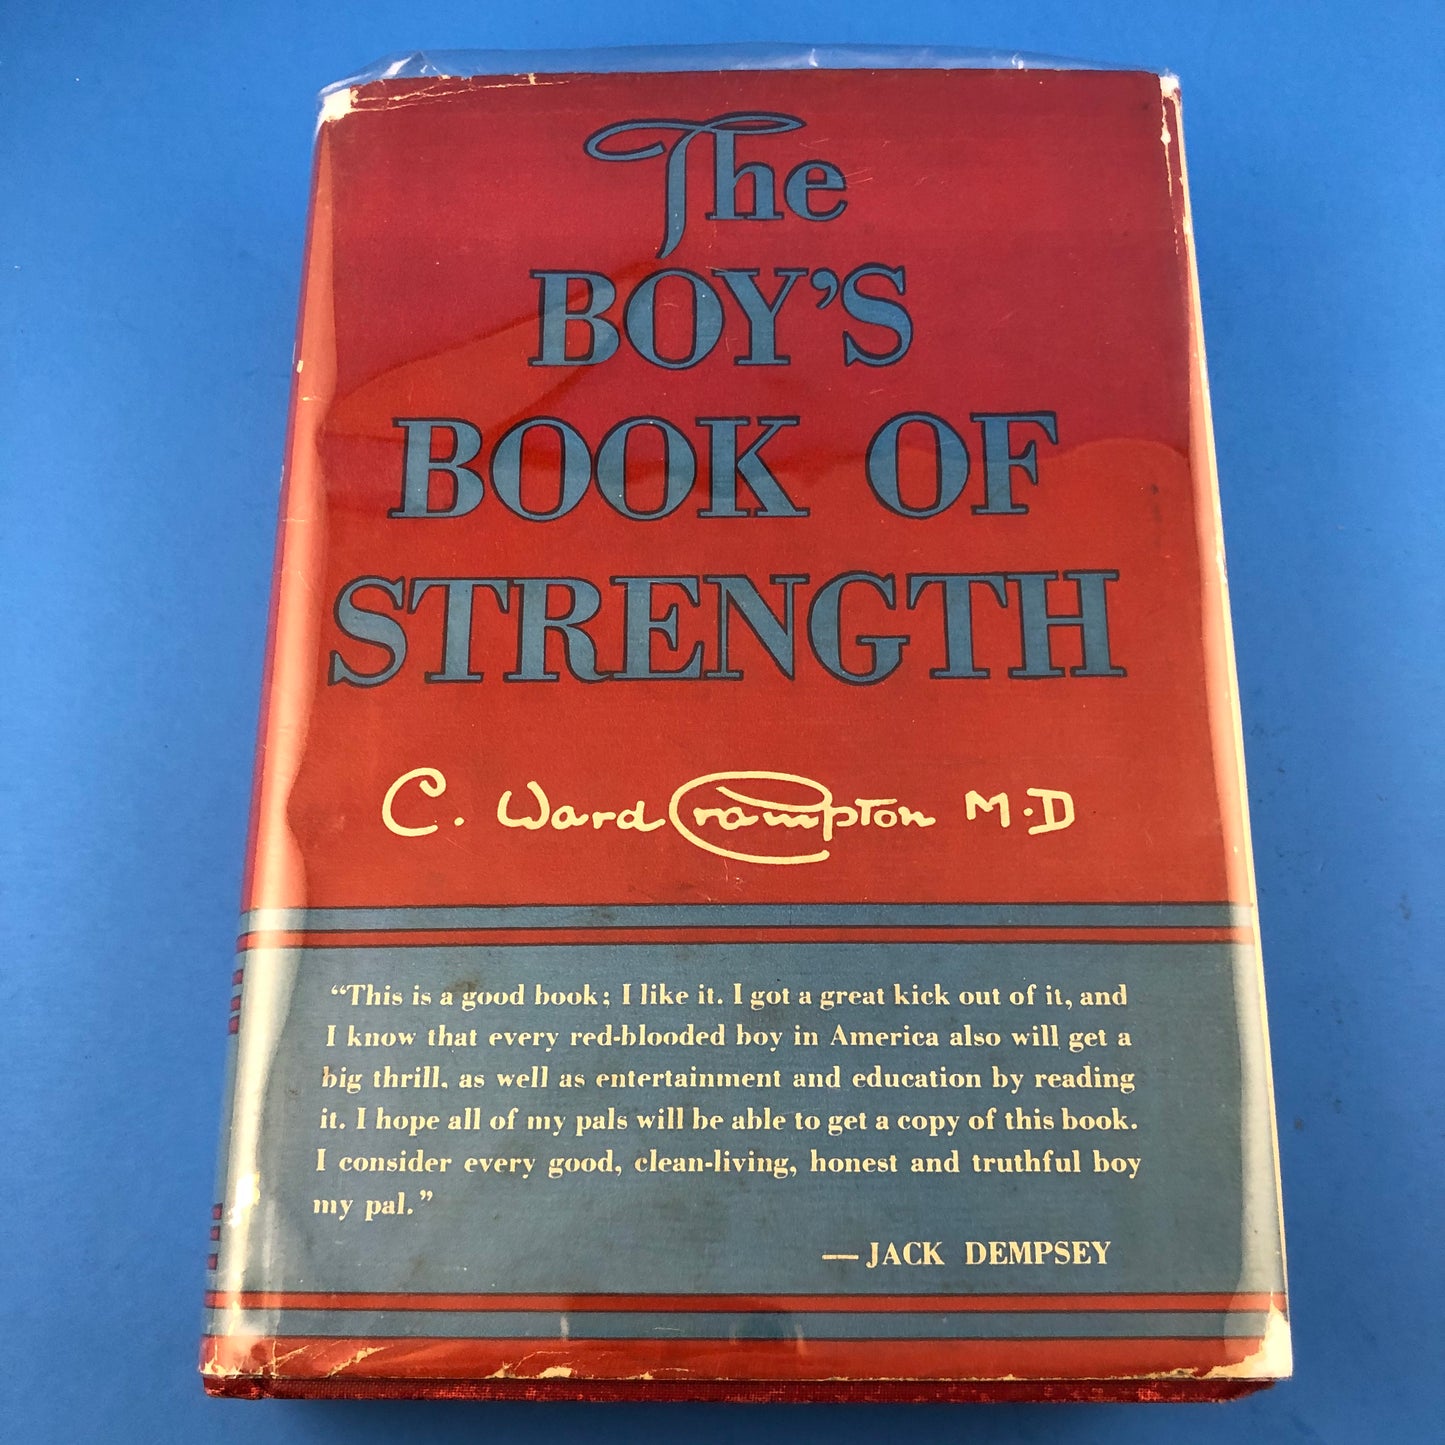 The Boy's Book of Strength